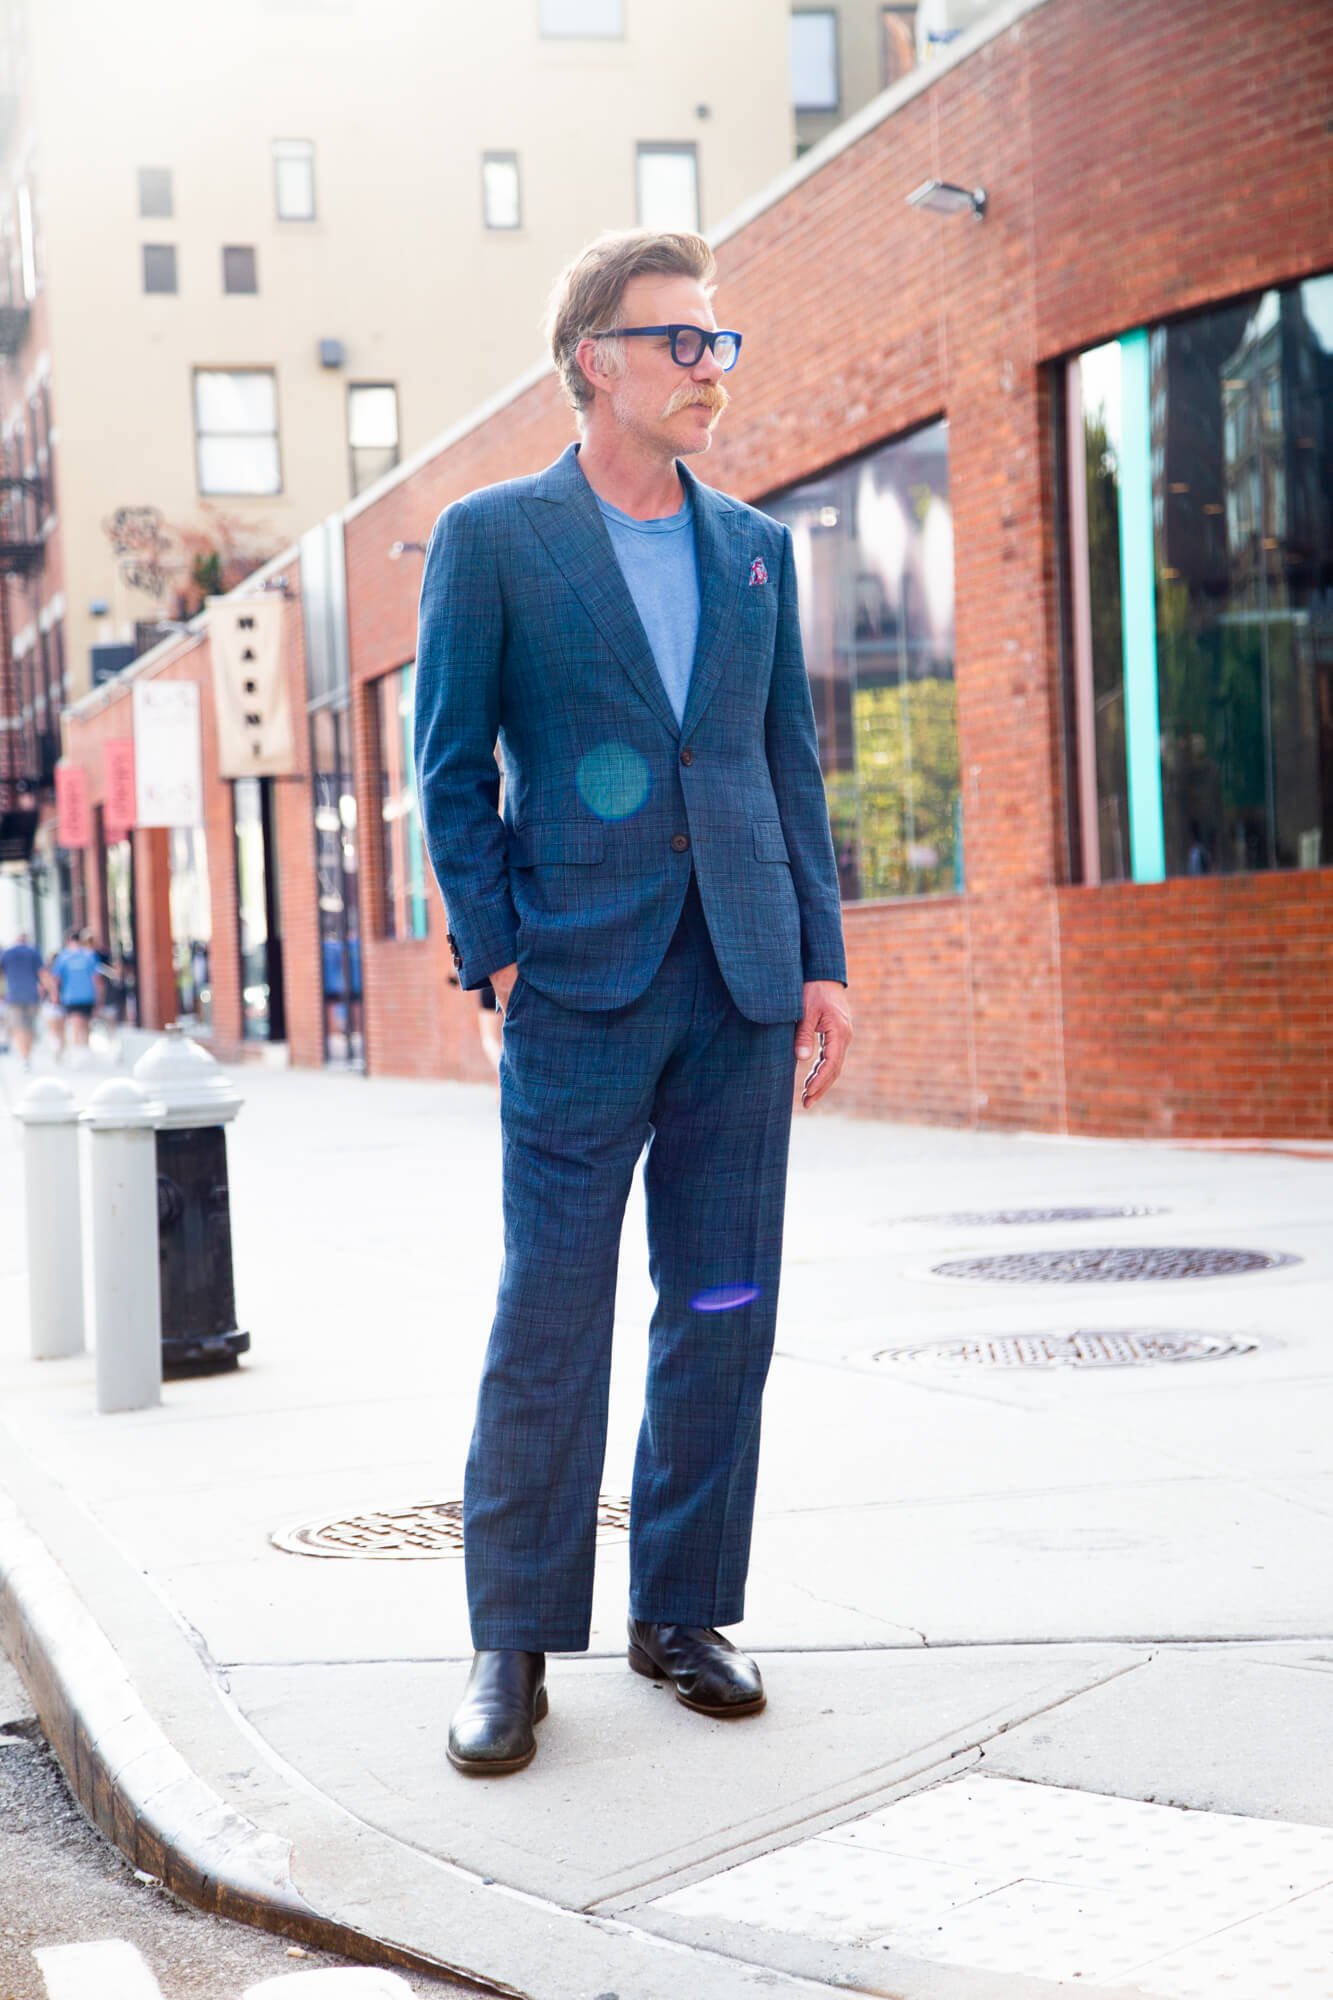 How to Wear a Men's Suit in Summer | Man of Many